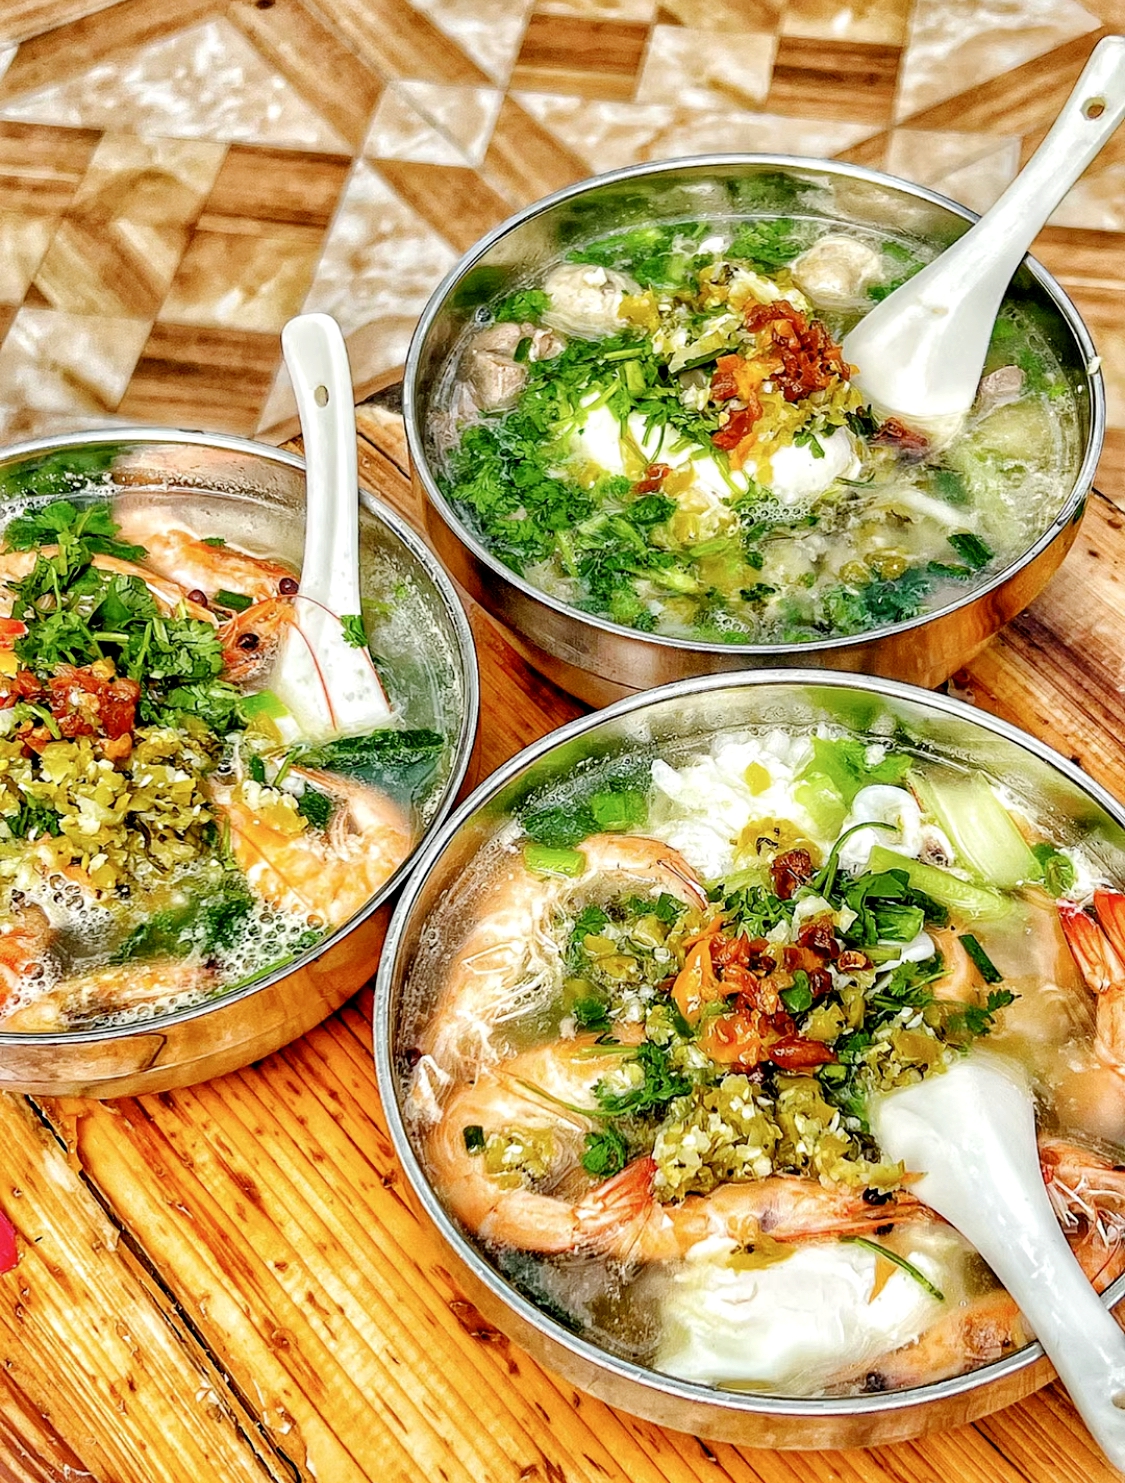 Rice noodles is one of the most characteristic and popular specialties of Hainan. /Photo provided to CGTN